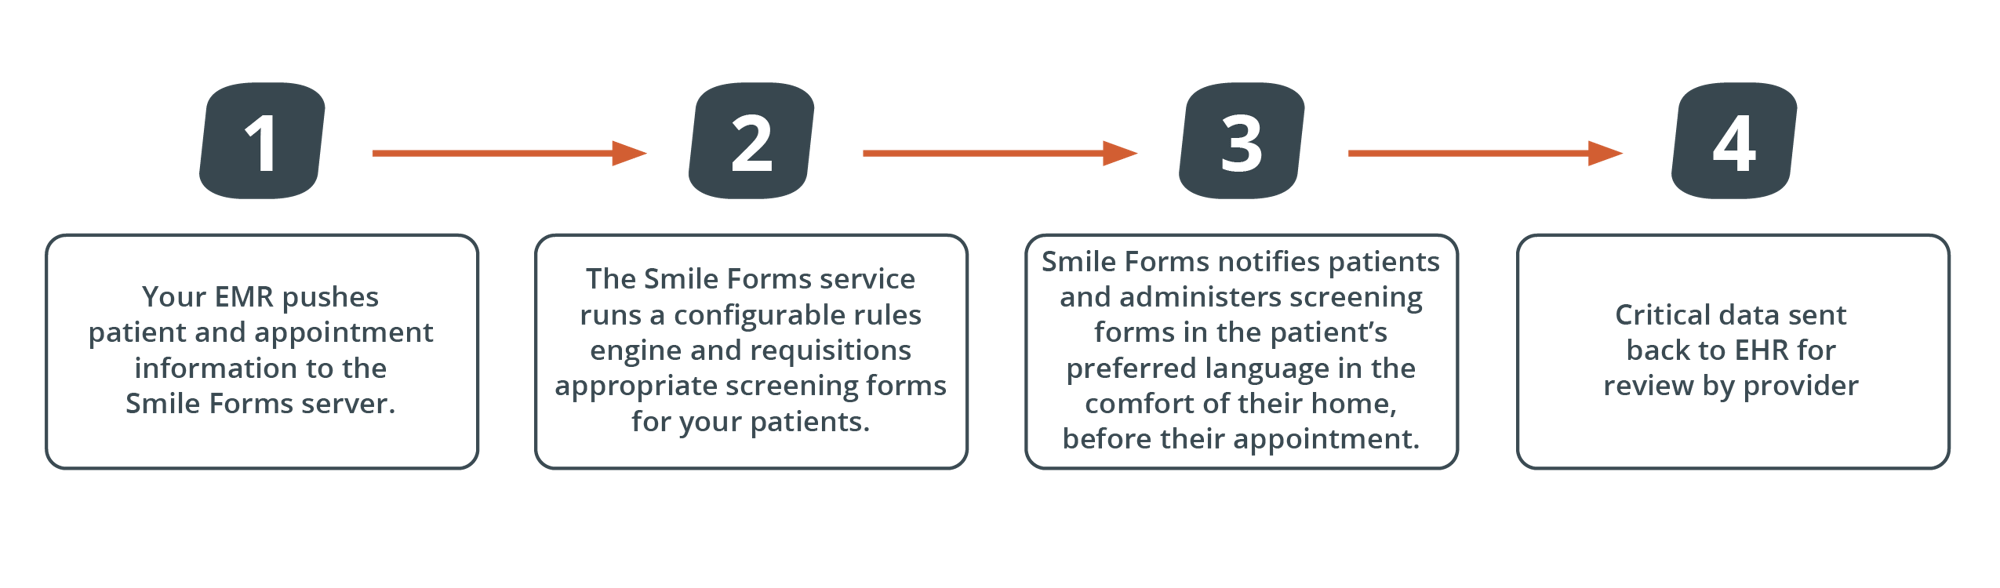 4857- Forms Solution page Graphic R2